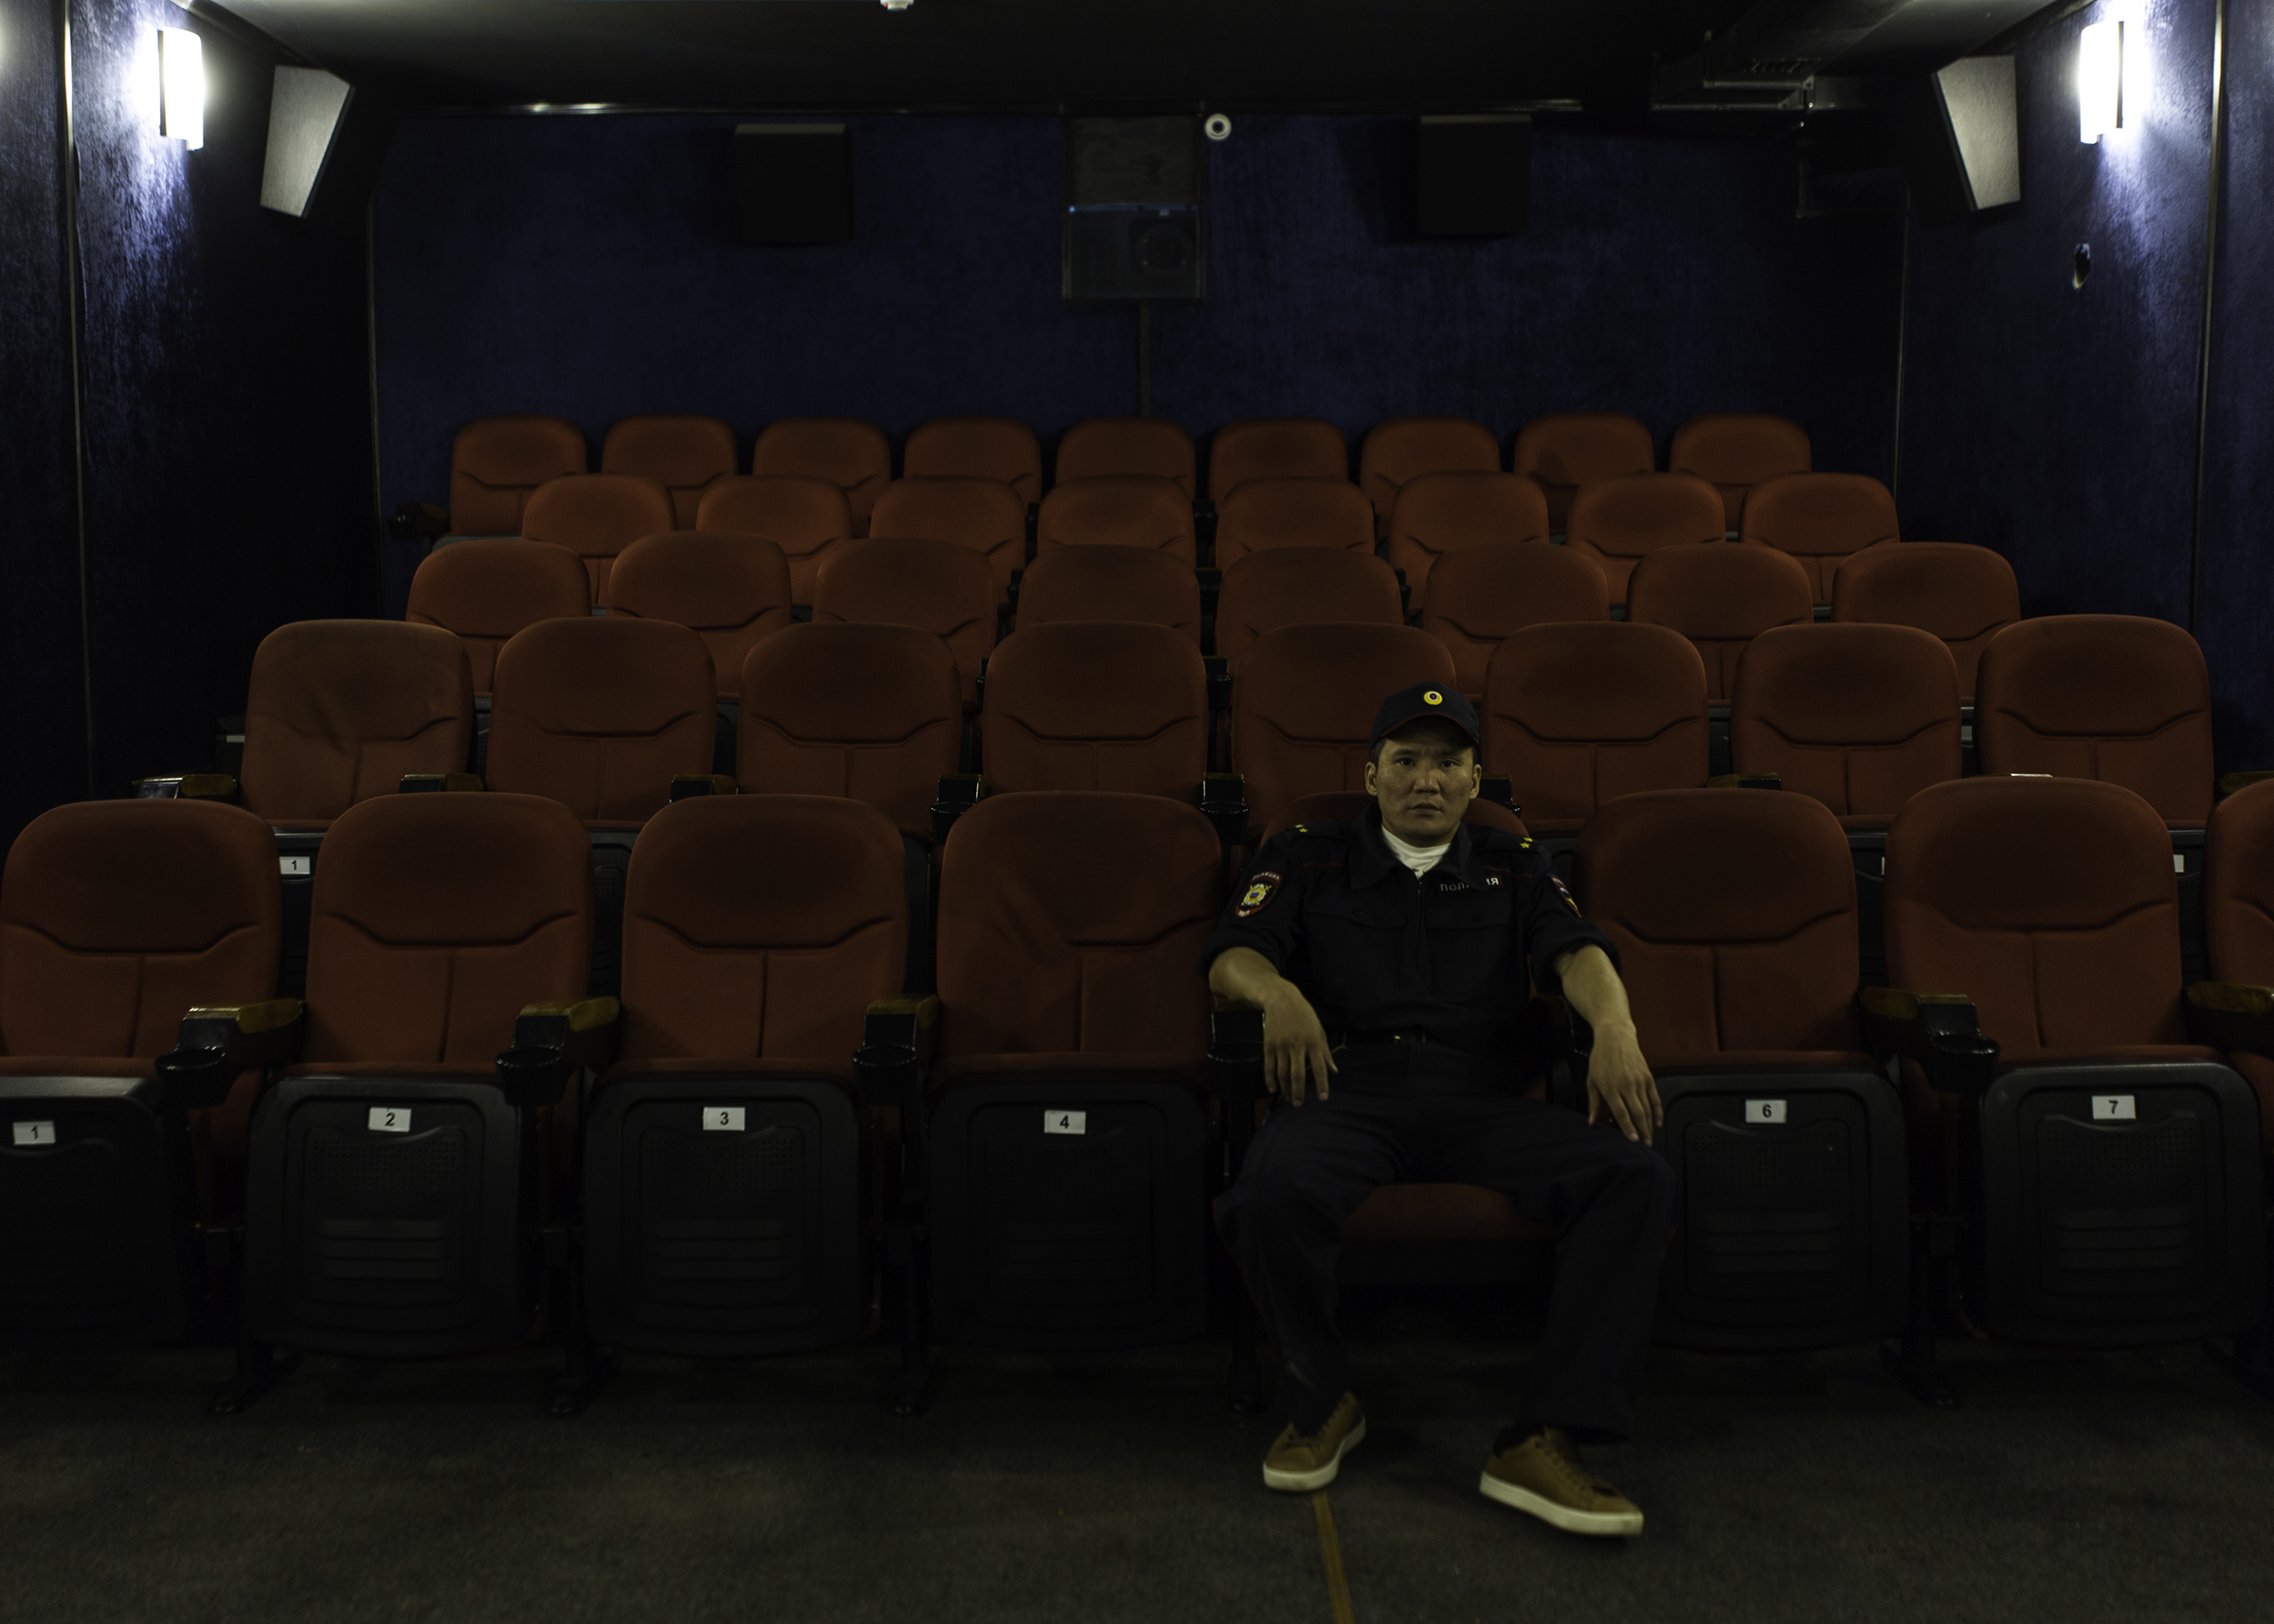 Theater actor Vladimir Okhlopkov, who played the role of a police officer in the horror film 'The Cursed Land' directed by Stepan Burnashev, poses in a small movie theater in Yakutsk, Yakutia in June 2019. (Alexey Vasilyev)